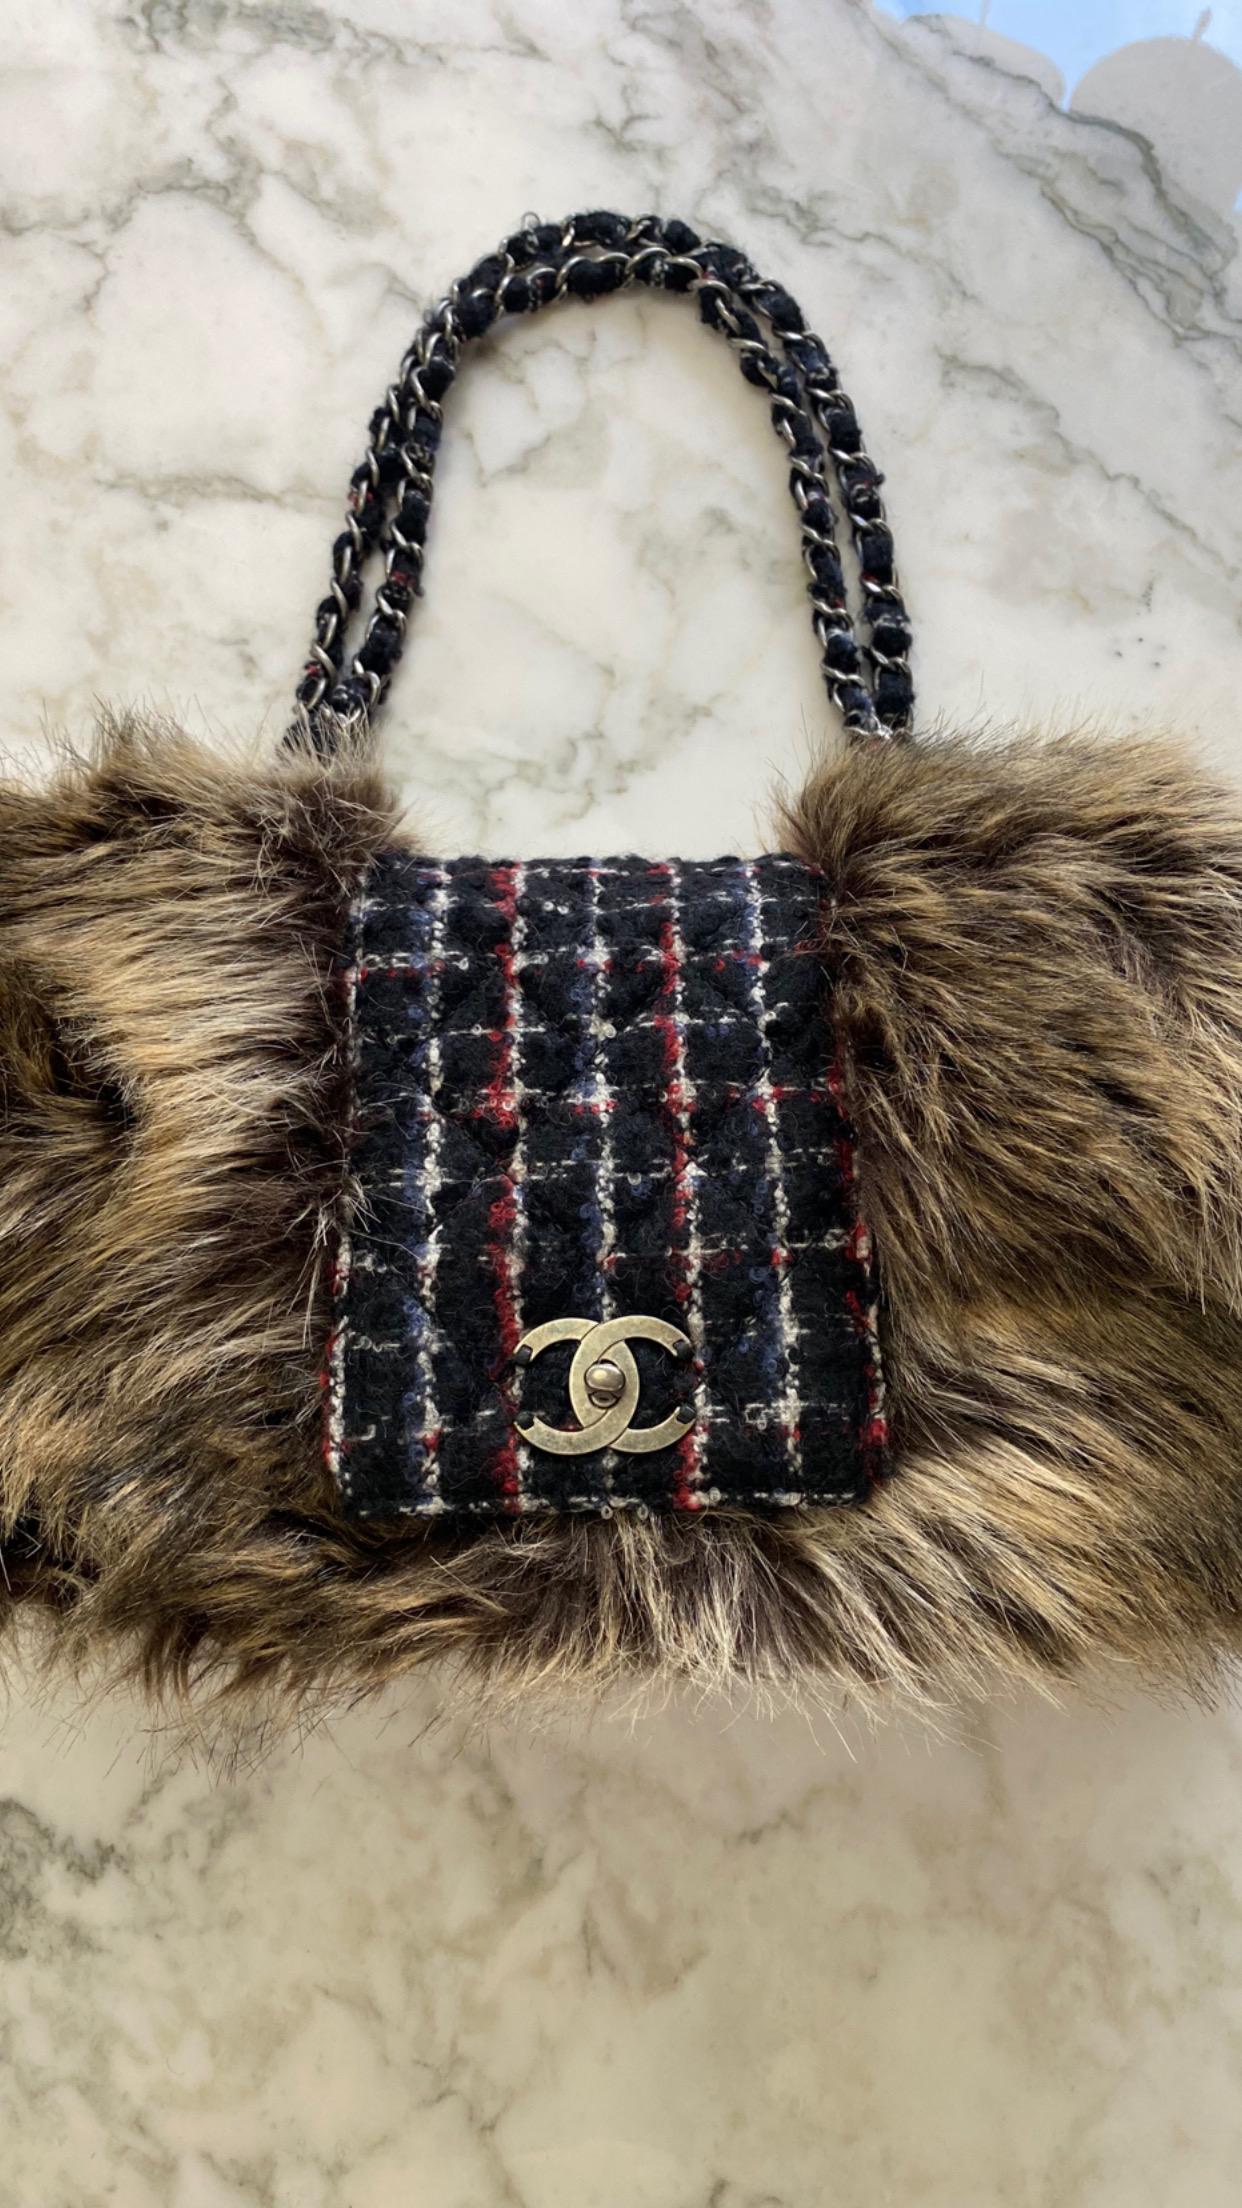 Brand New . Never worn Chanel Plaid Purse with Fur come with Box and ID from 2010.
Measurement: 13” wide / 3” deep